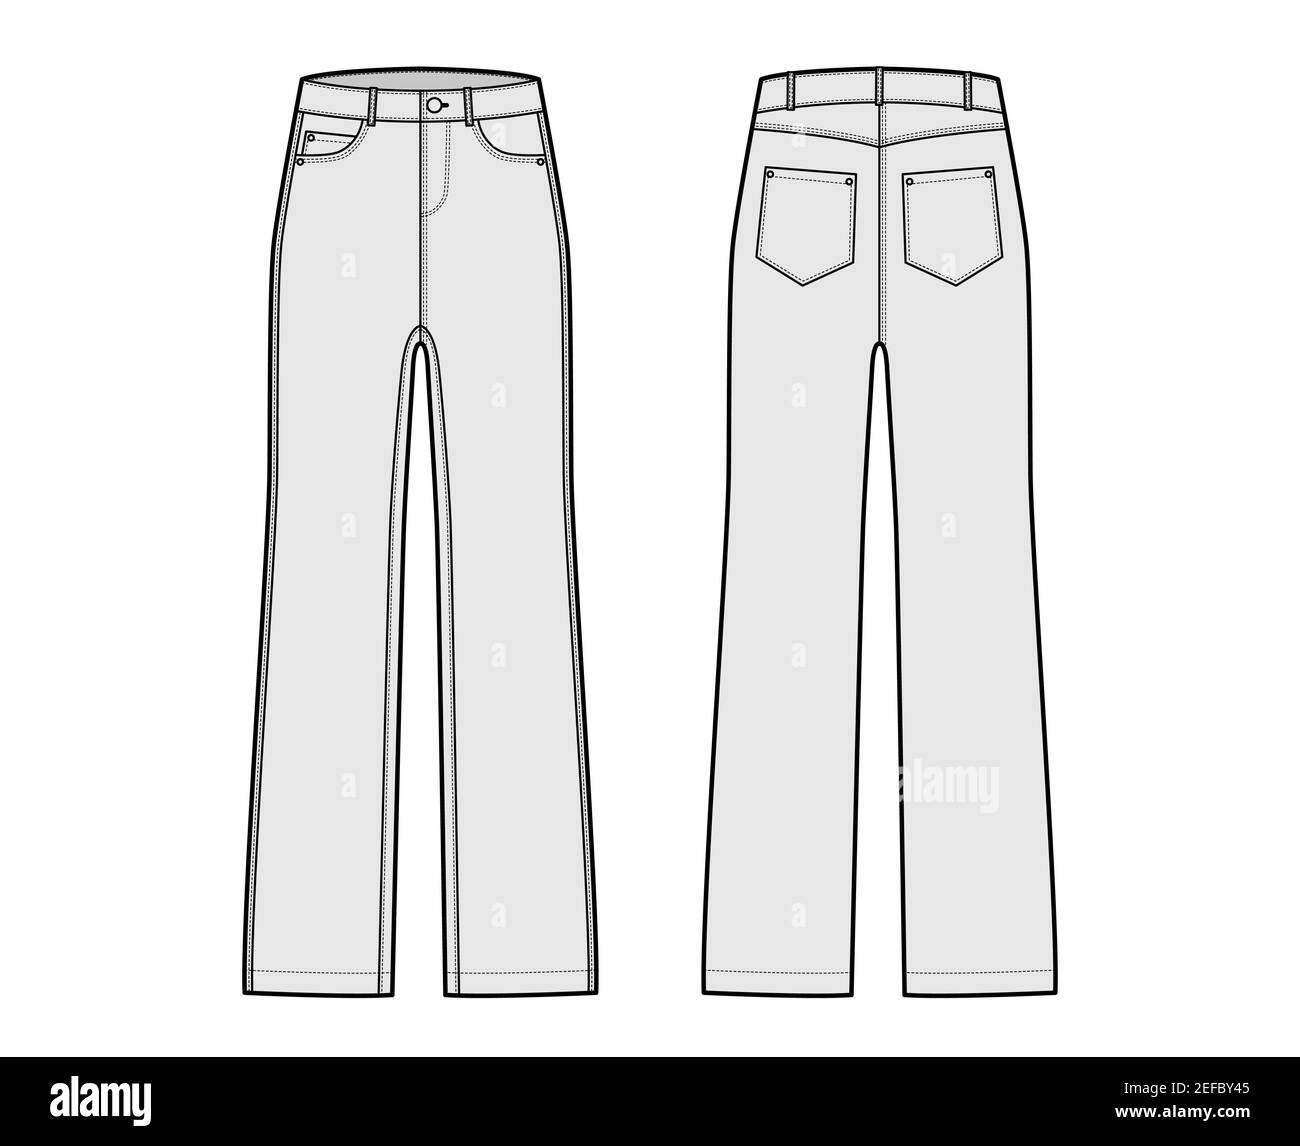 Jeans Denim pants technical fashion illustration with full length, low ...